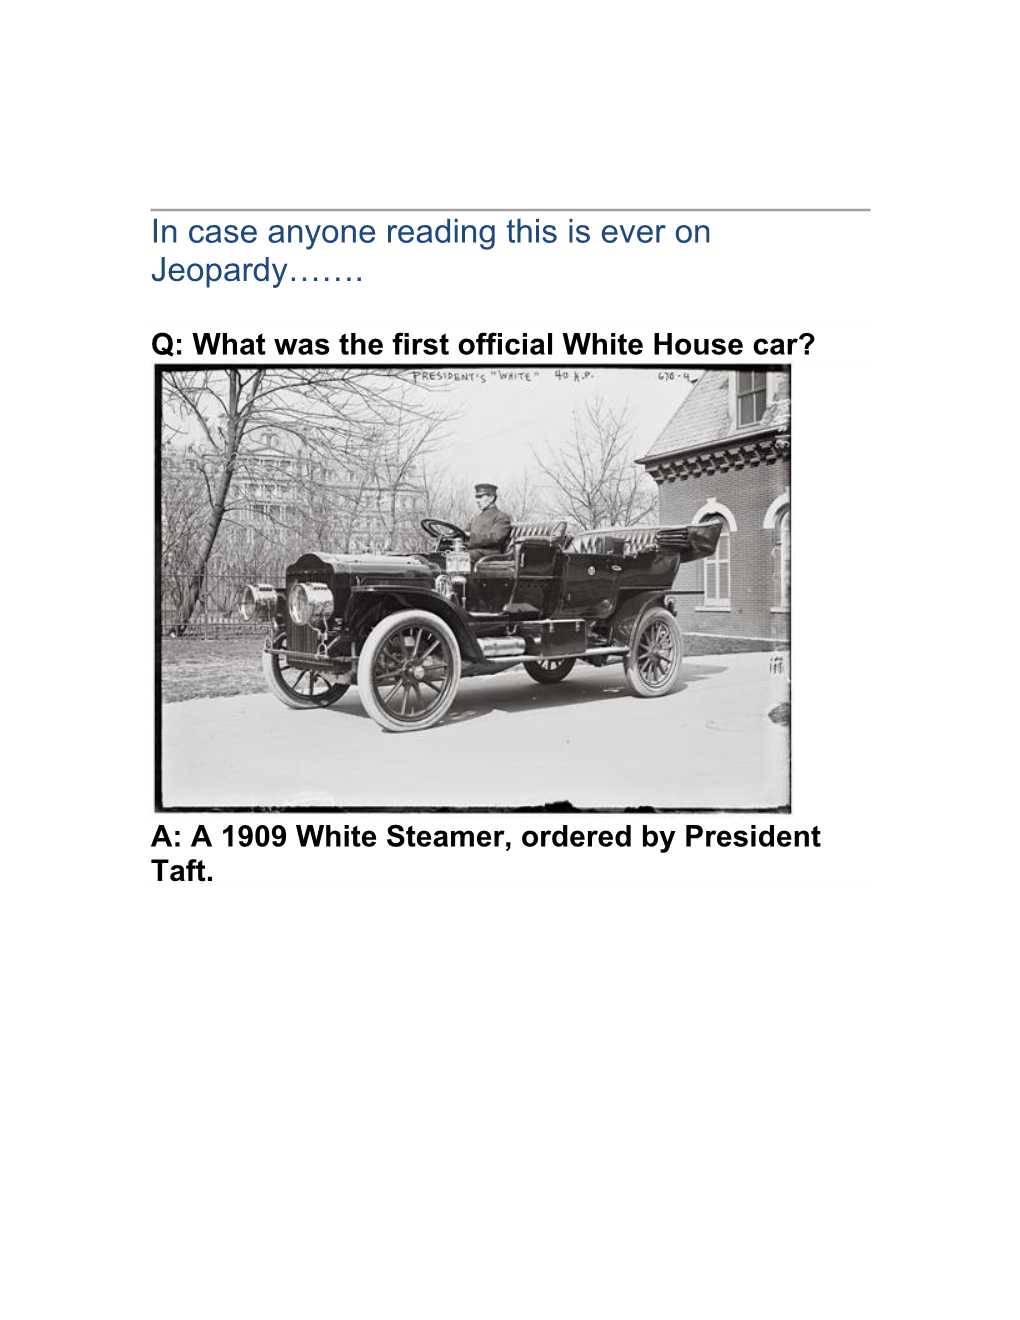 Q: What Was the First Official White House Car?